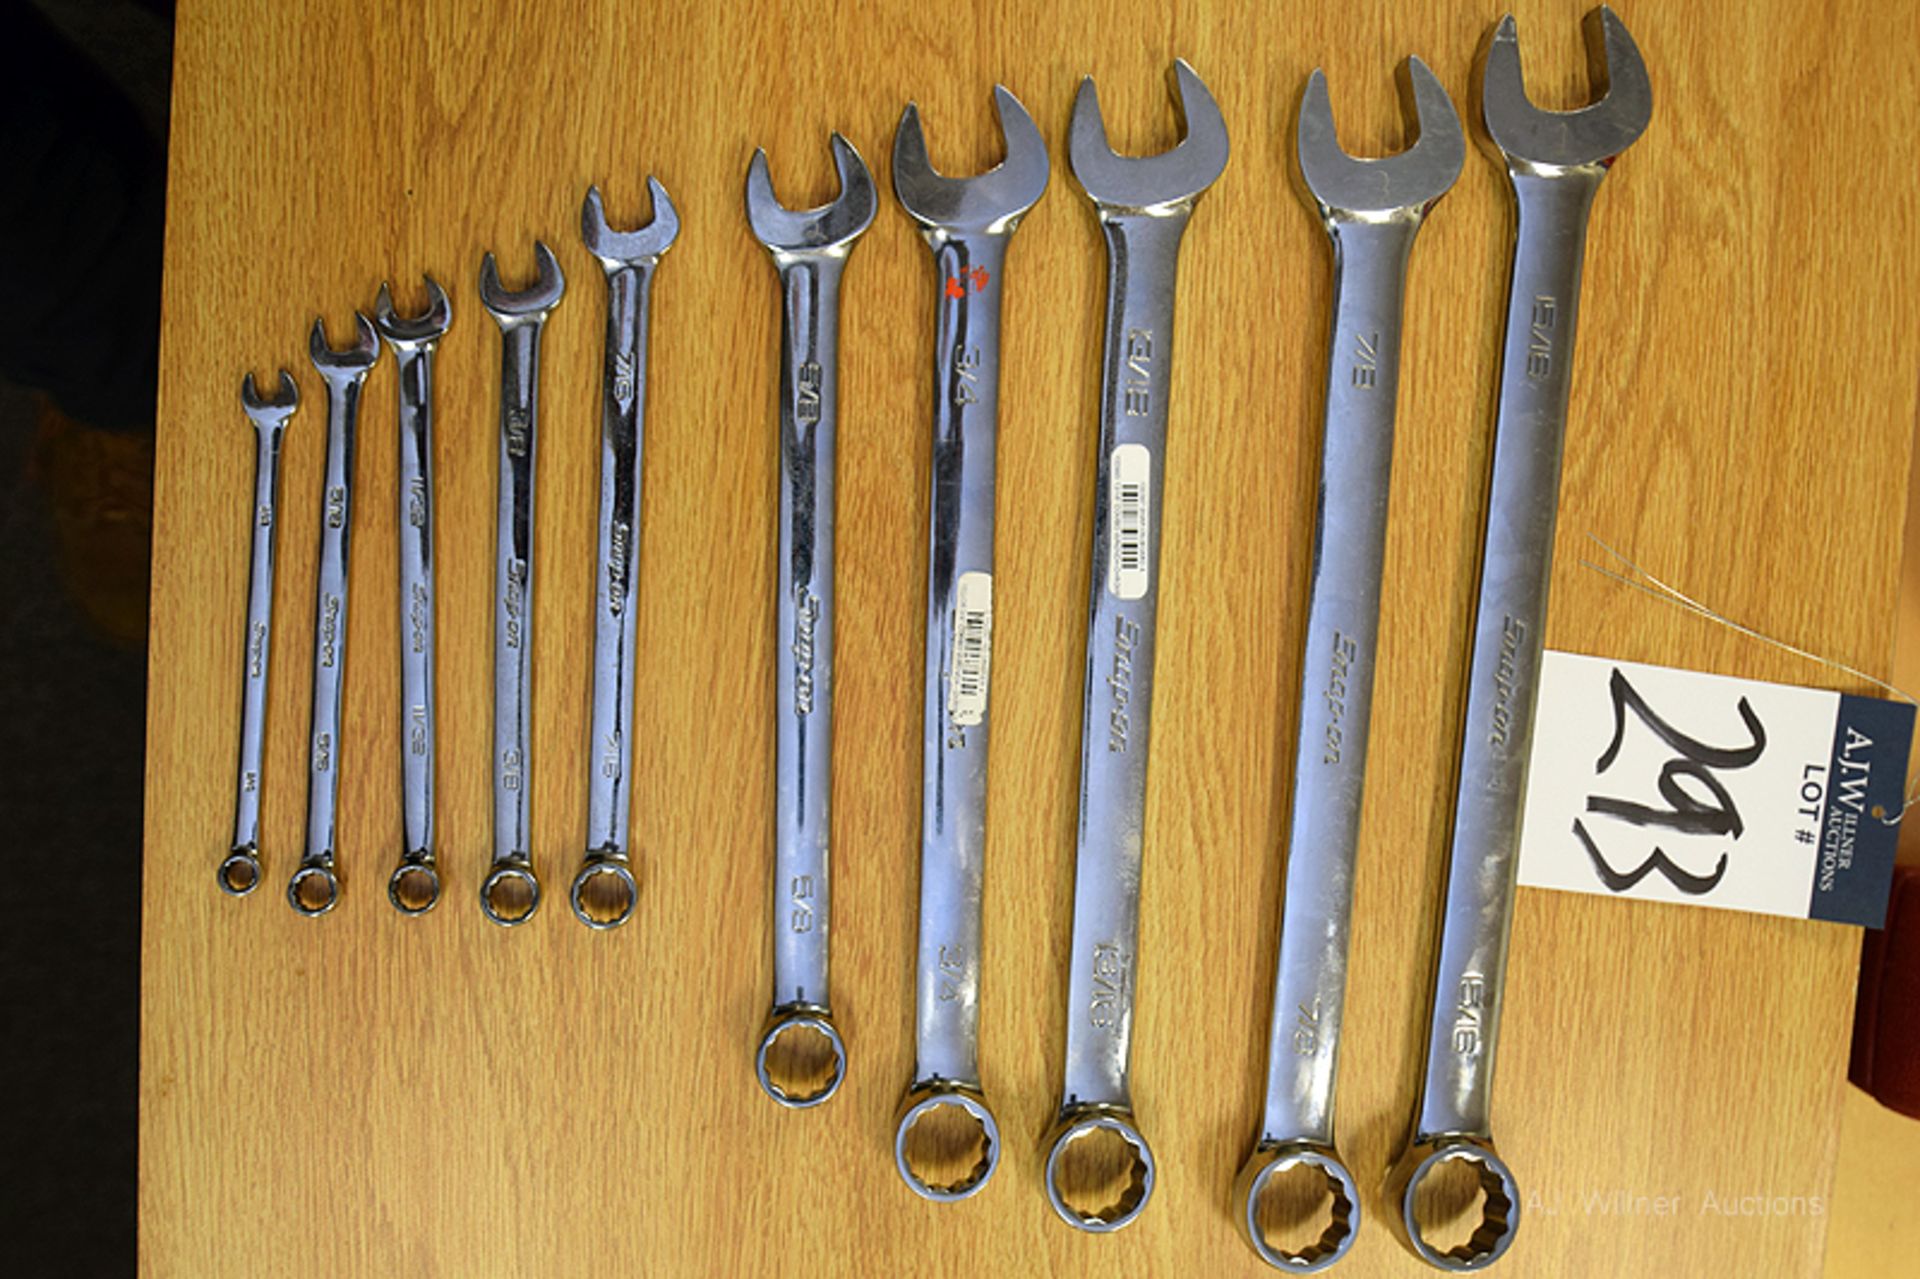 Snap-On 10pc wrench set 1/4 5/16 11/32 3/8 7/16 5/8 3/4 13/16 7/8 15/16